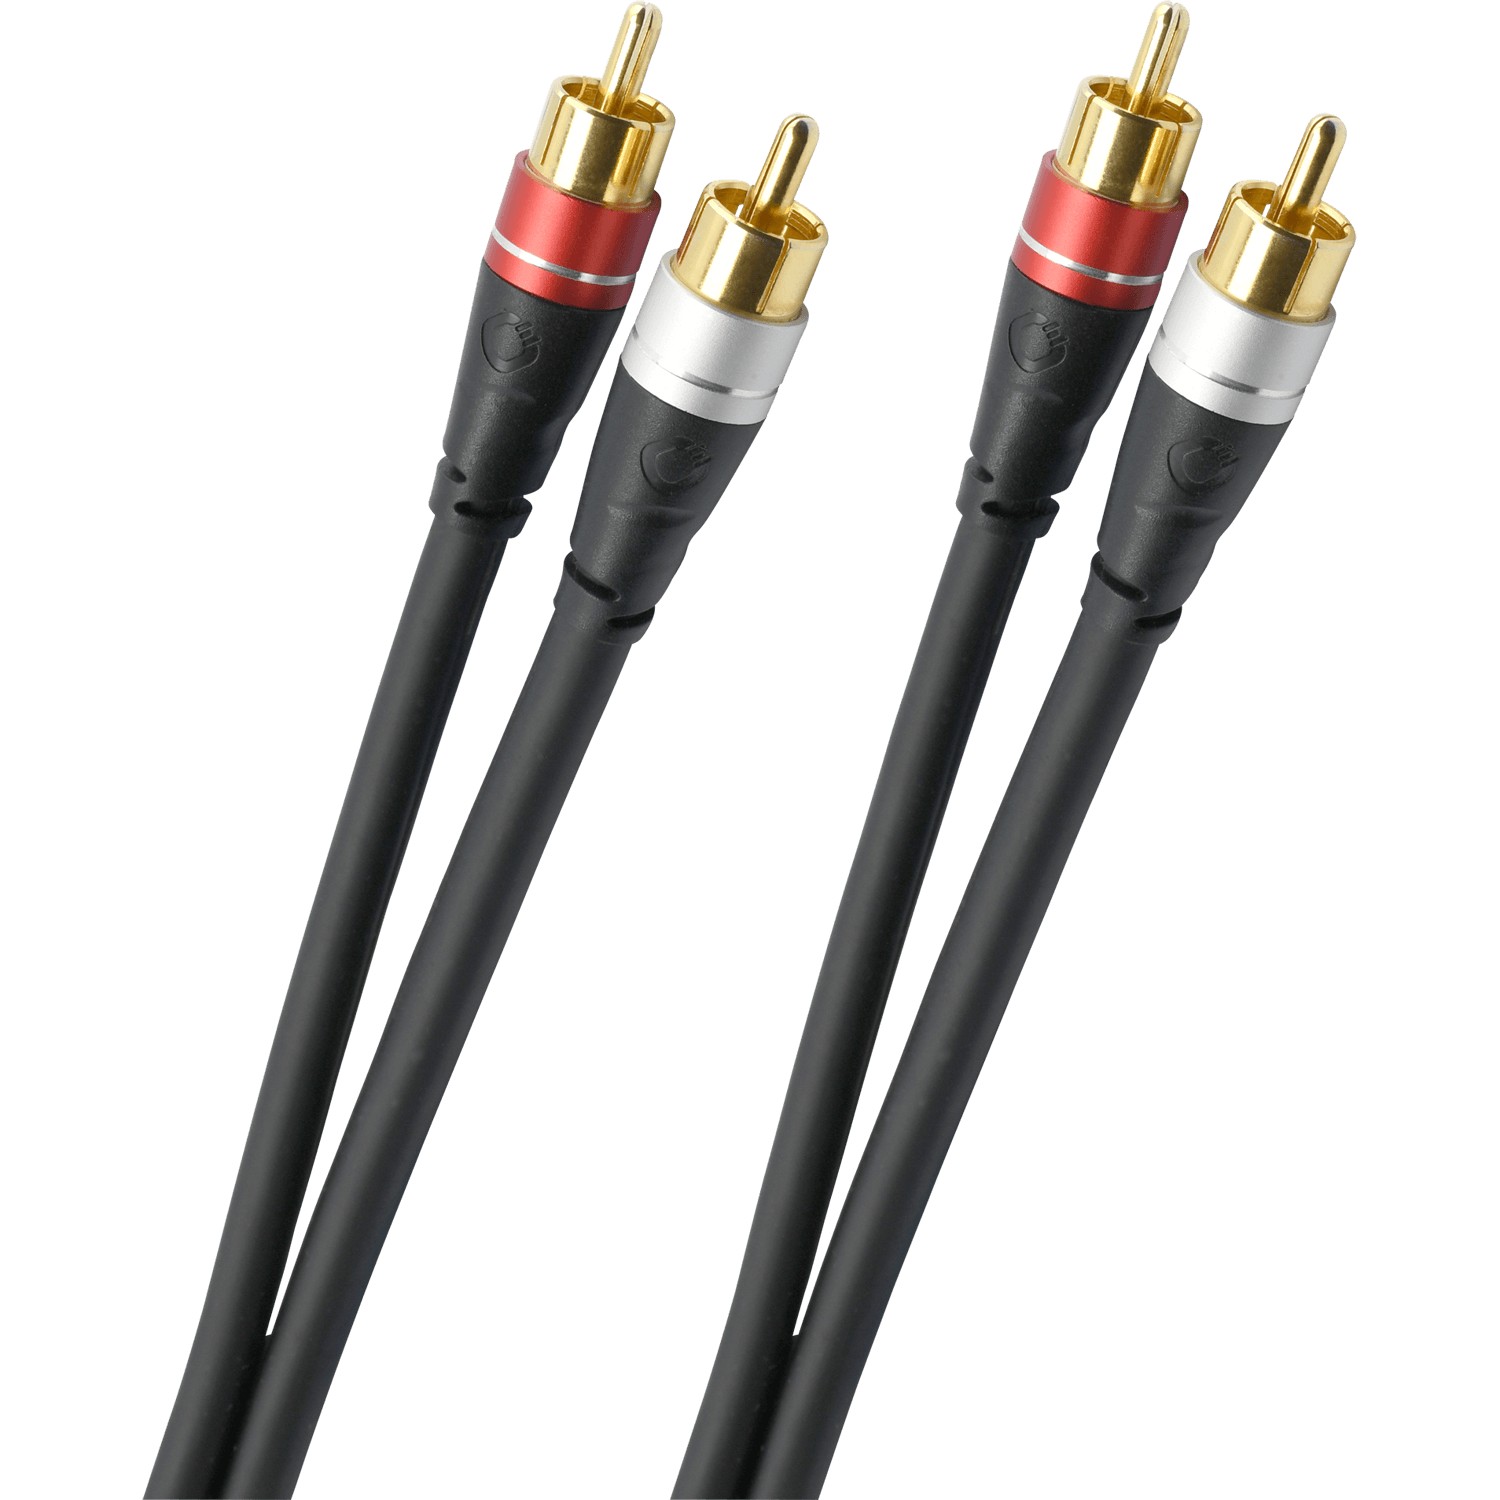 Кабели межблочные аудио Oehlbach EXCELLENCE Select Audio Link, Audio cable Cinch, 1.5m bw (D1C33143) hdmi кабели oehlbach select video link cable 3 0m 33103